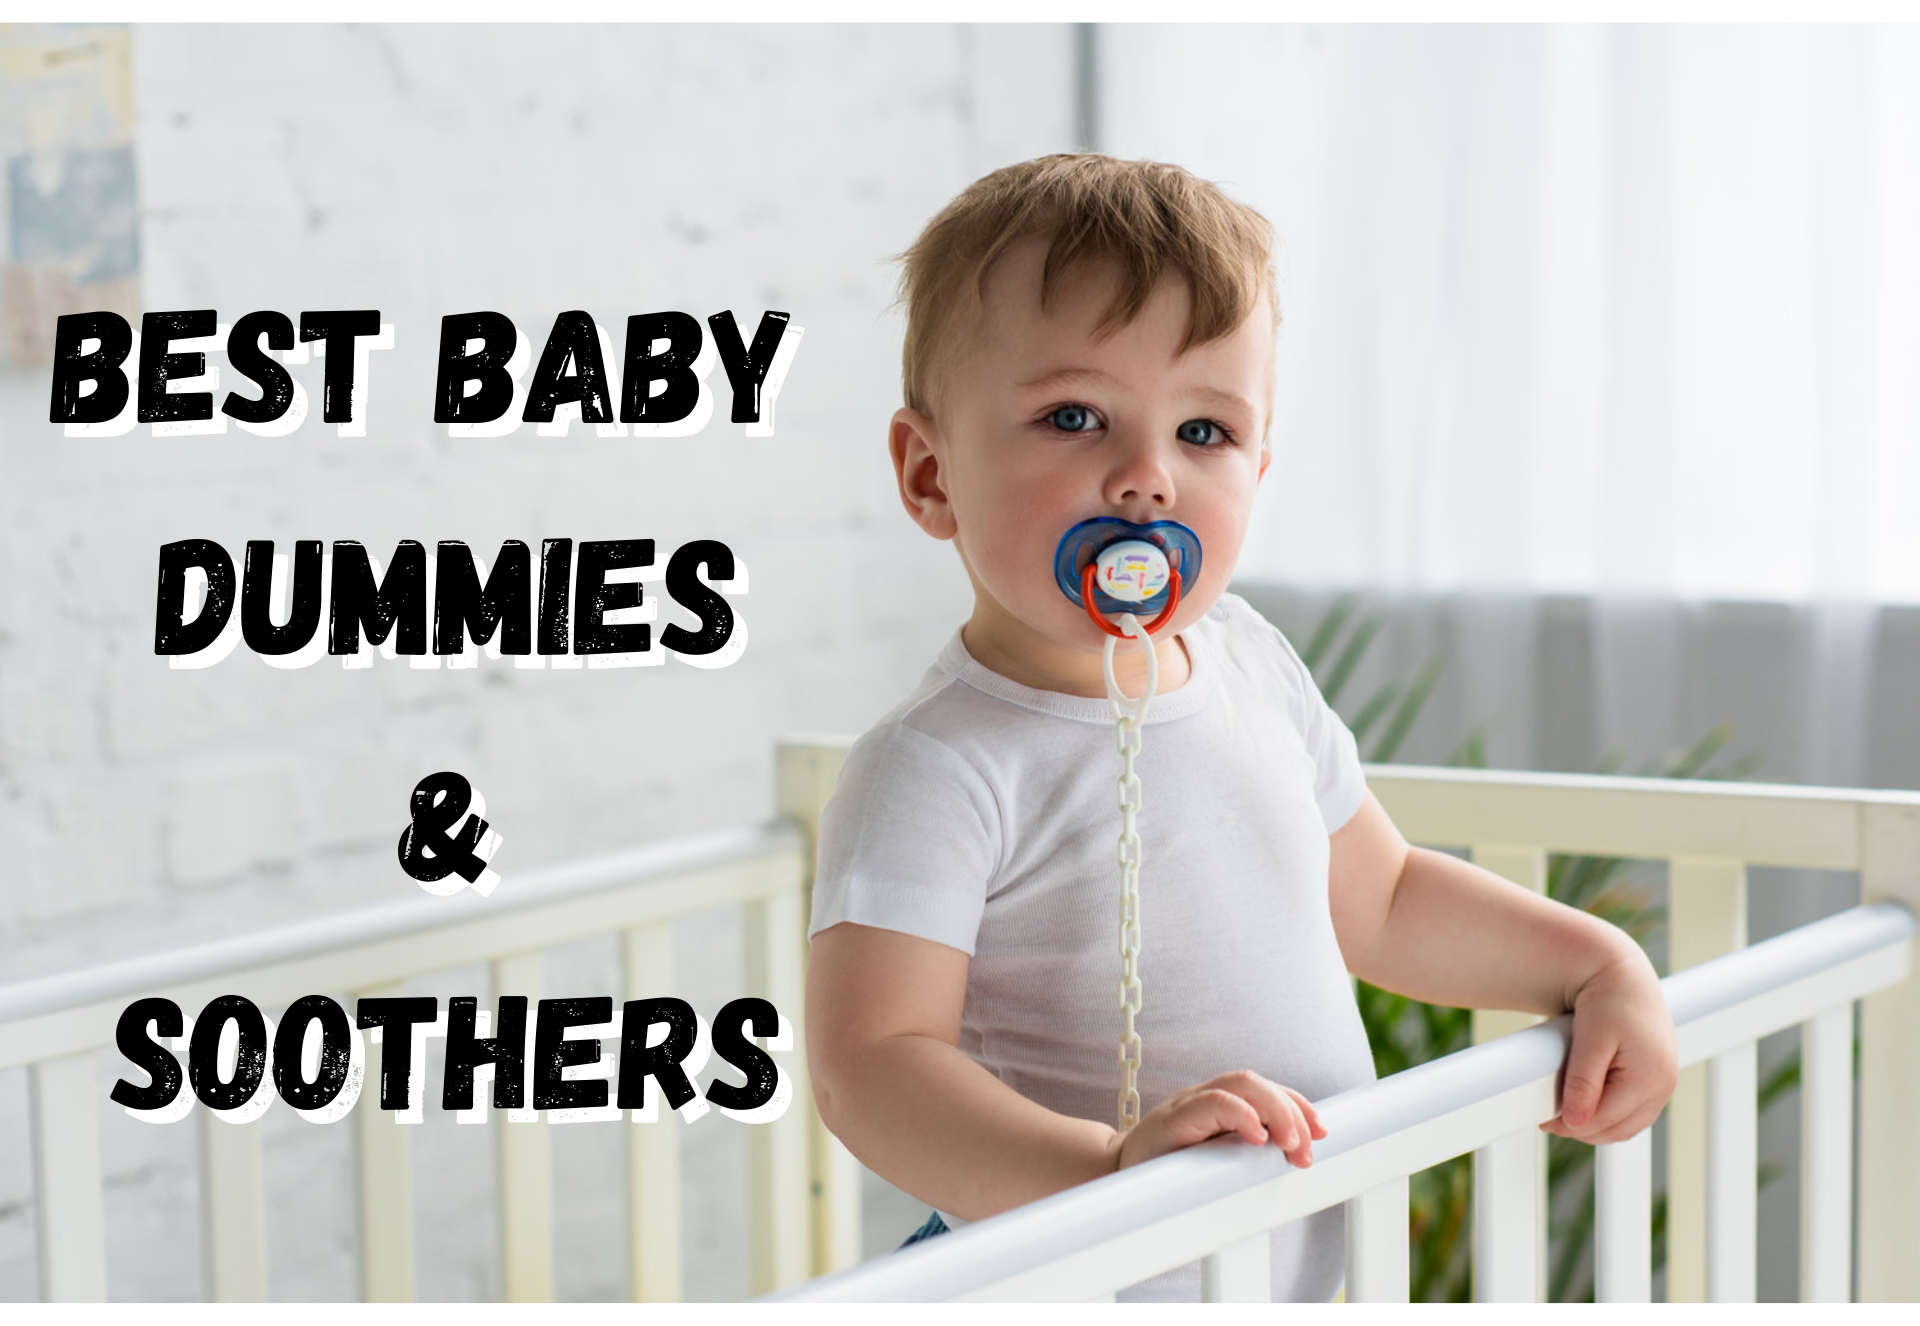 BEST BABY DUMMIES & SOOTHERS